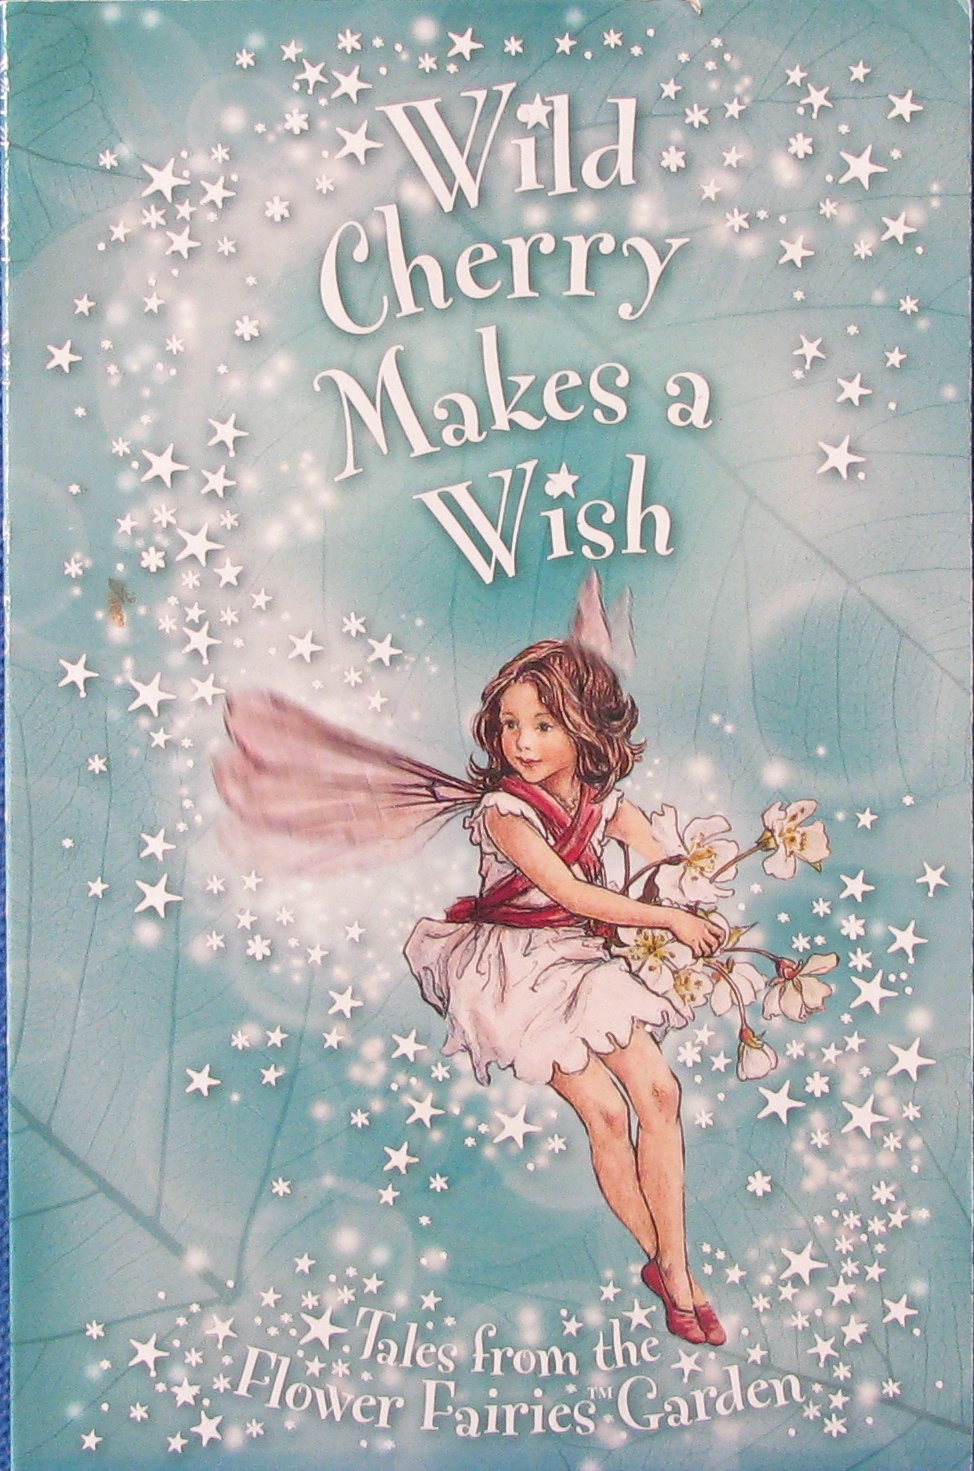 Wild Cherry Makes a Wish by Pippa Le Quesne